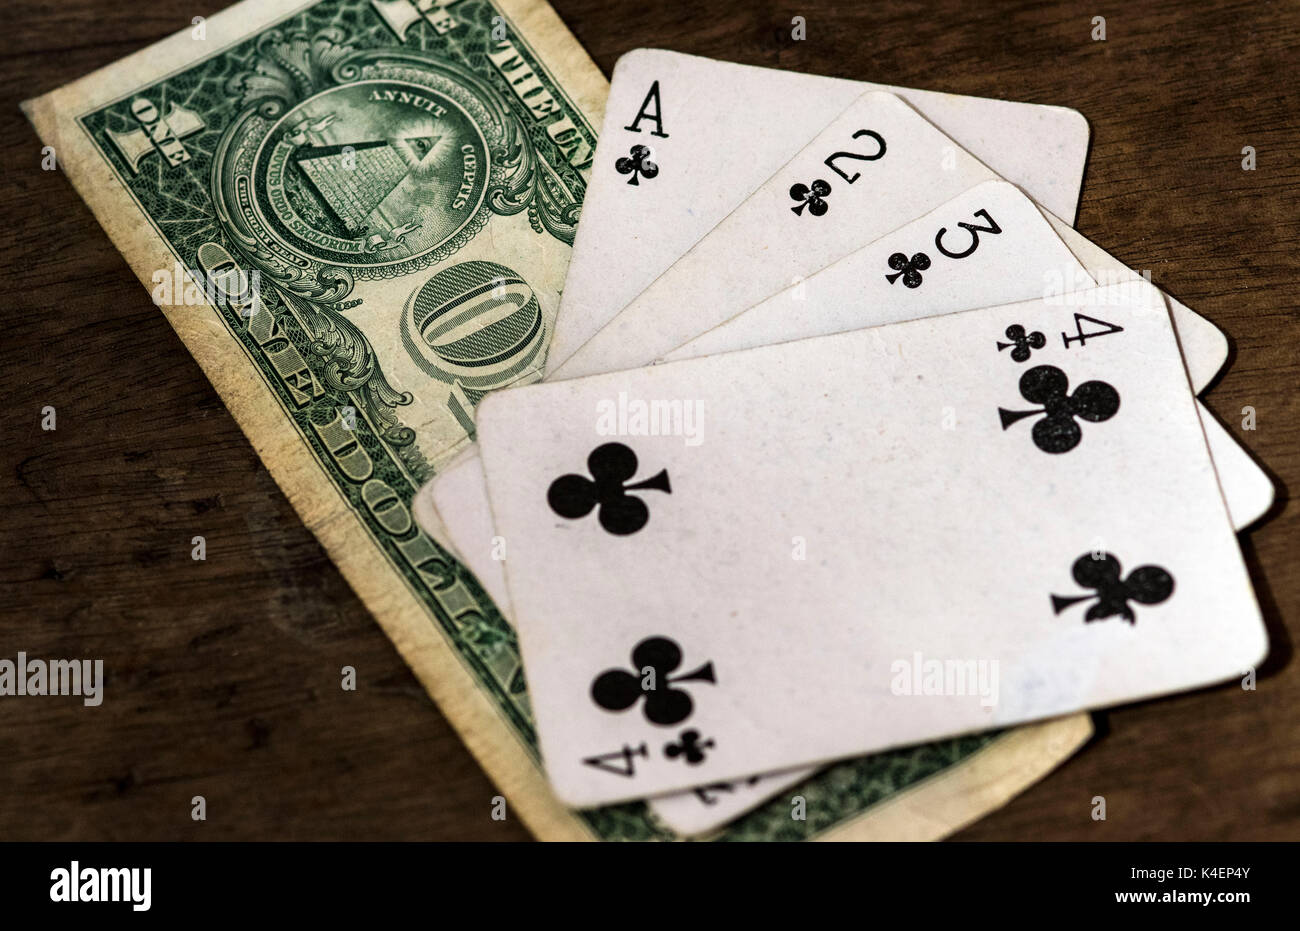 US money one dollar bill and white playing cards, face up, on top of a wooden surface, money, gambling and winning concept idea Stock Photo